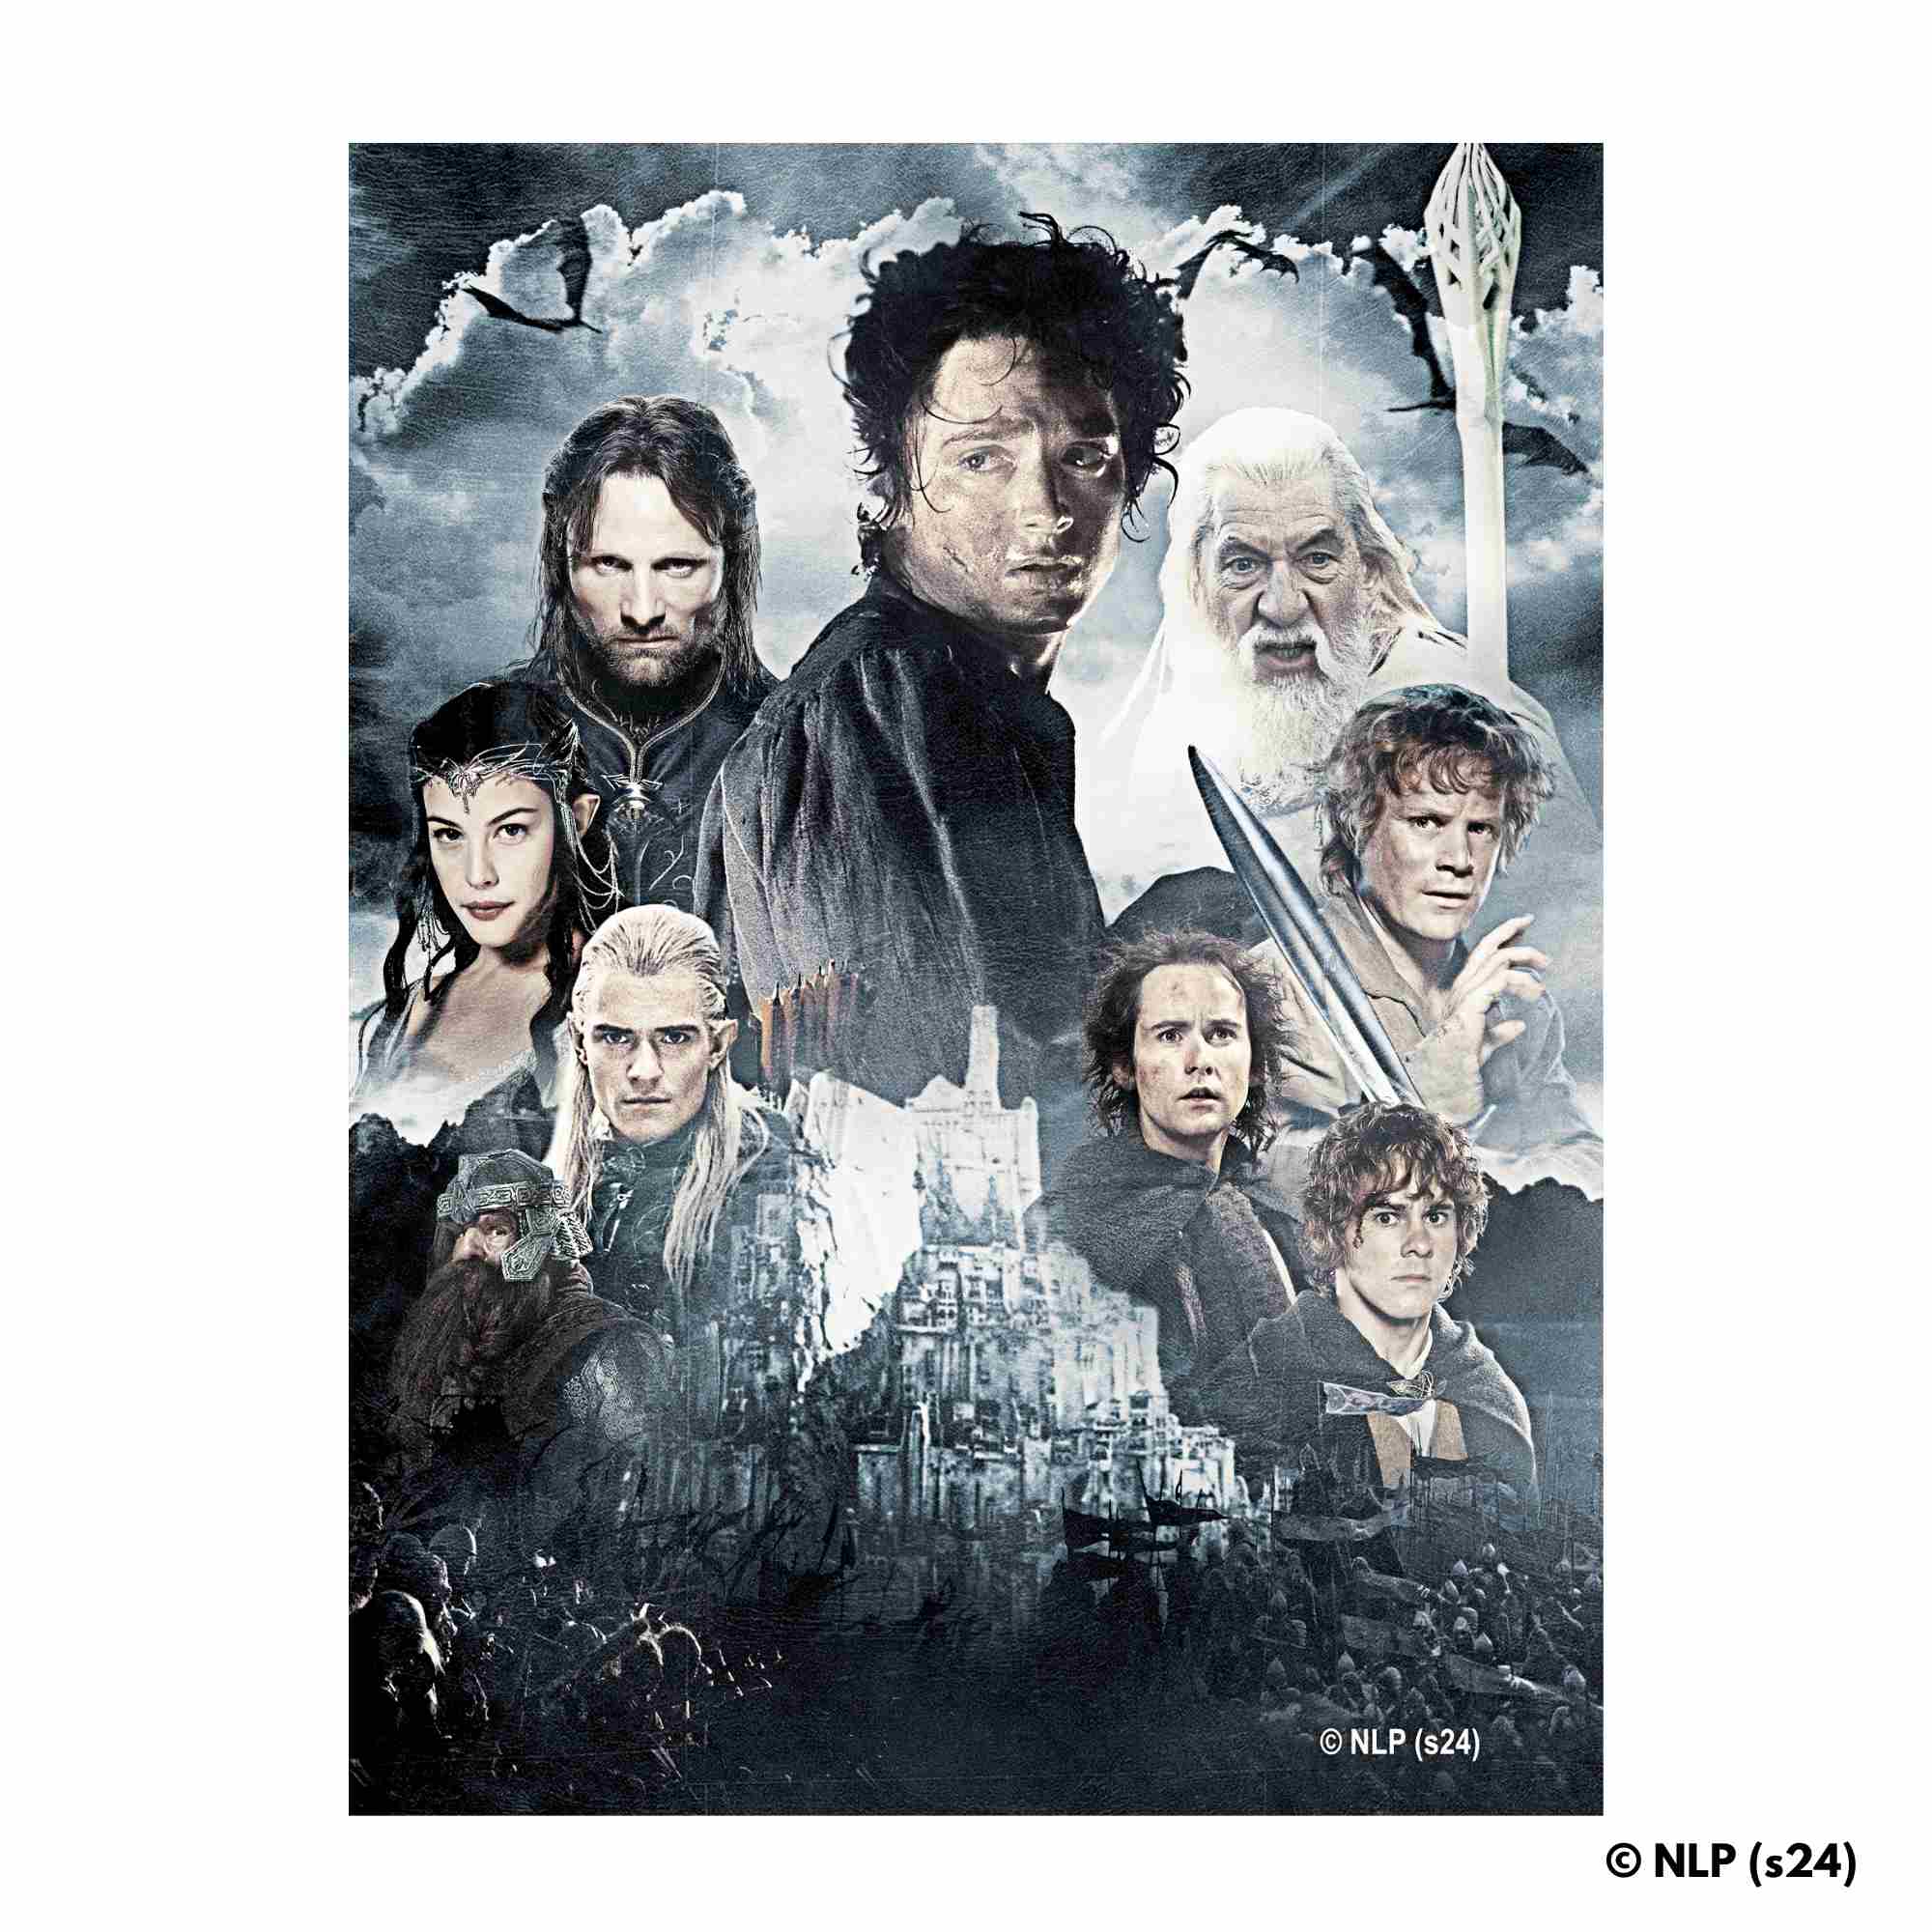 Animal Jigsaw Puzzle > Wooden Jigsaw Puzzle > Jigsaw Puzzle Heroes of Middle Earth - Wooden Jigsaw Puzzle